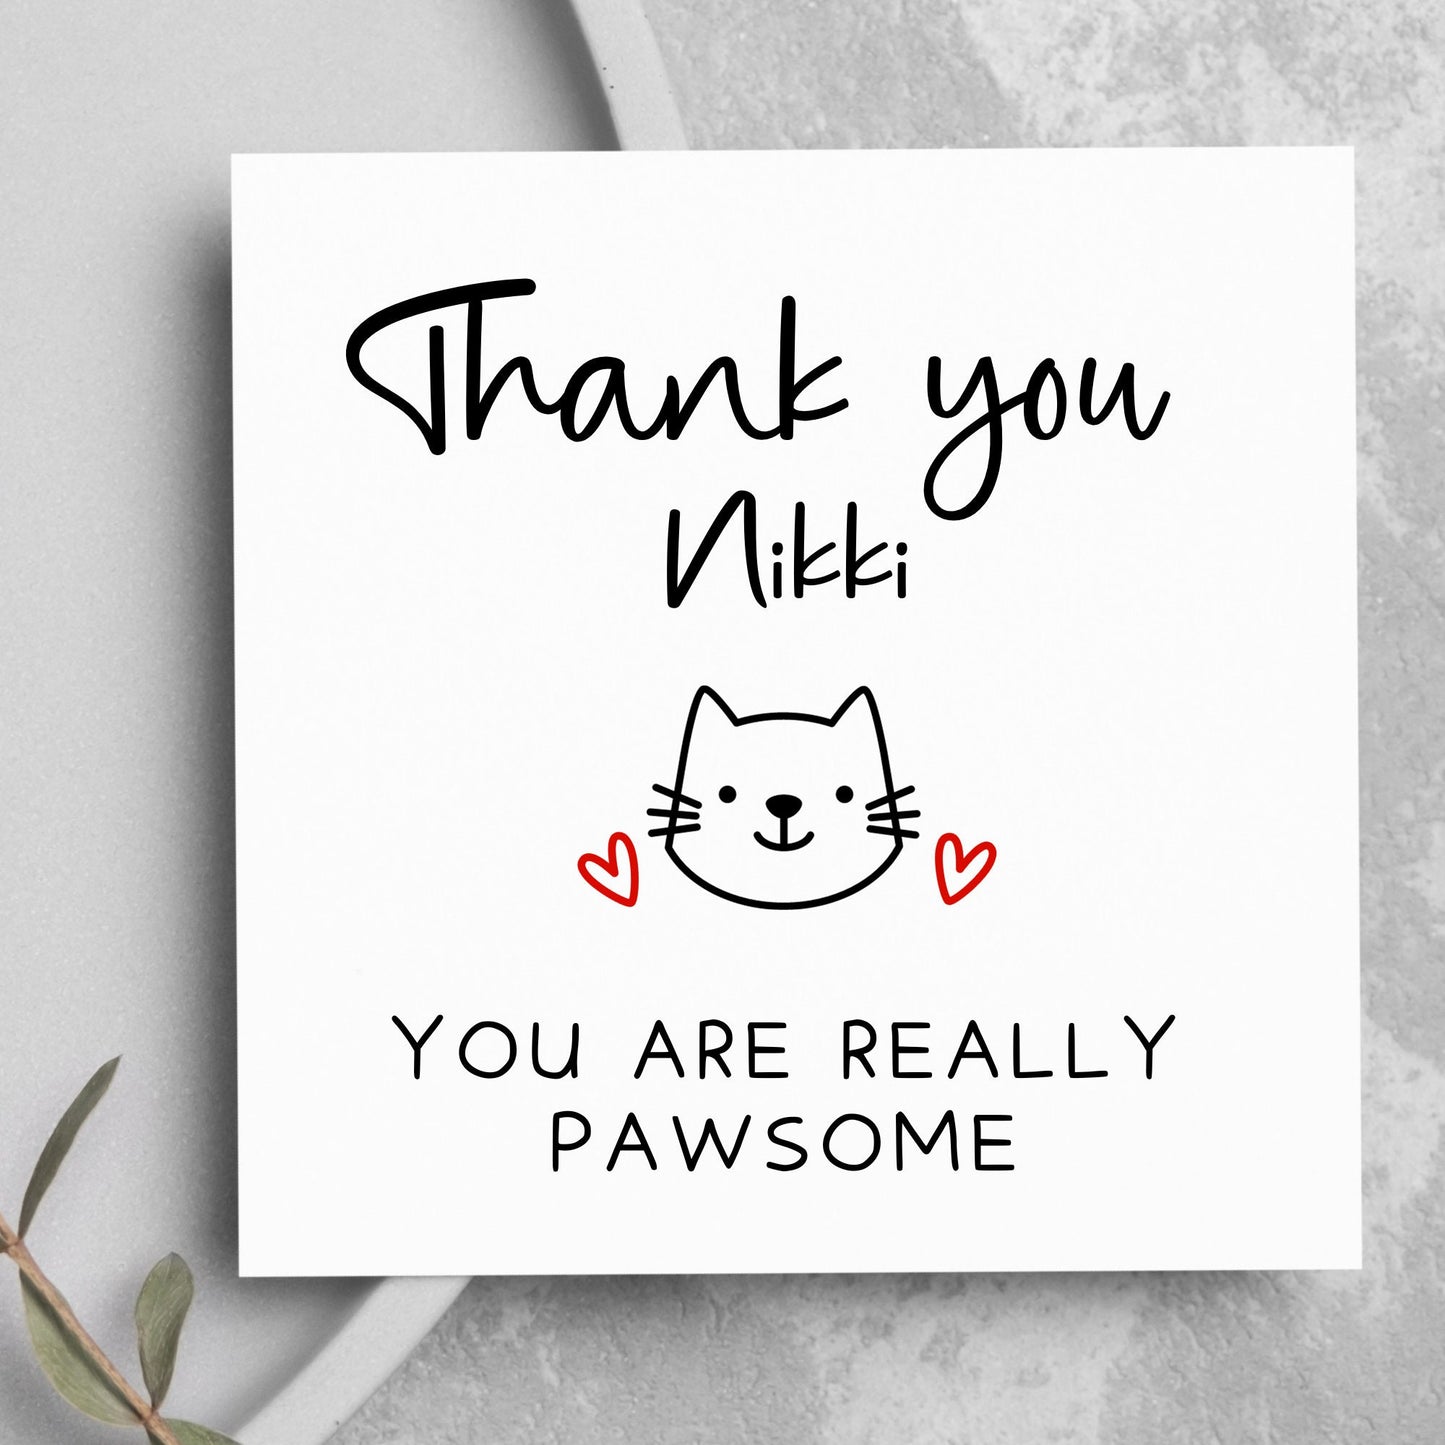 Thank you card, personalised thanks to pet sitter, thanks for looking after cat and dog, you are really pawsome